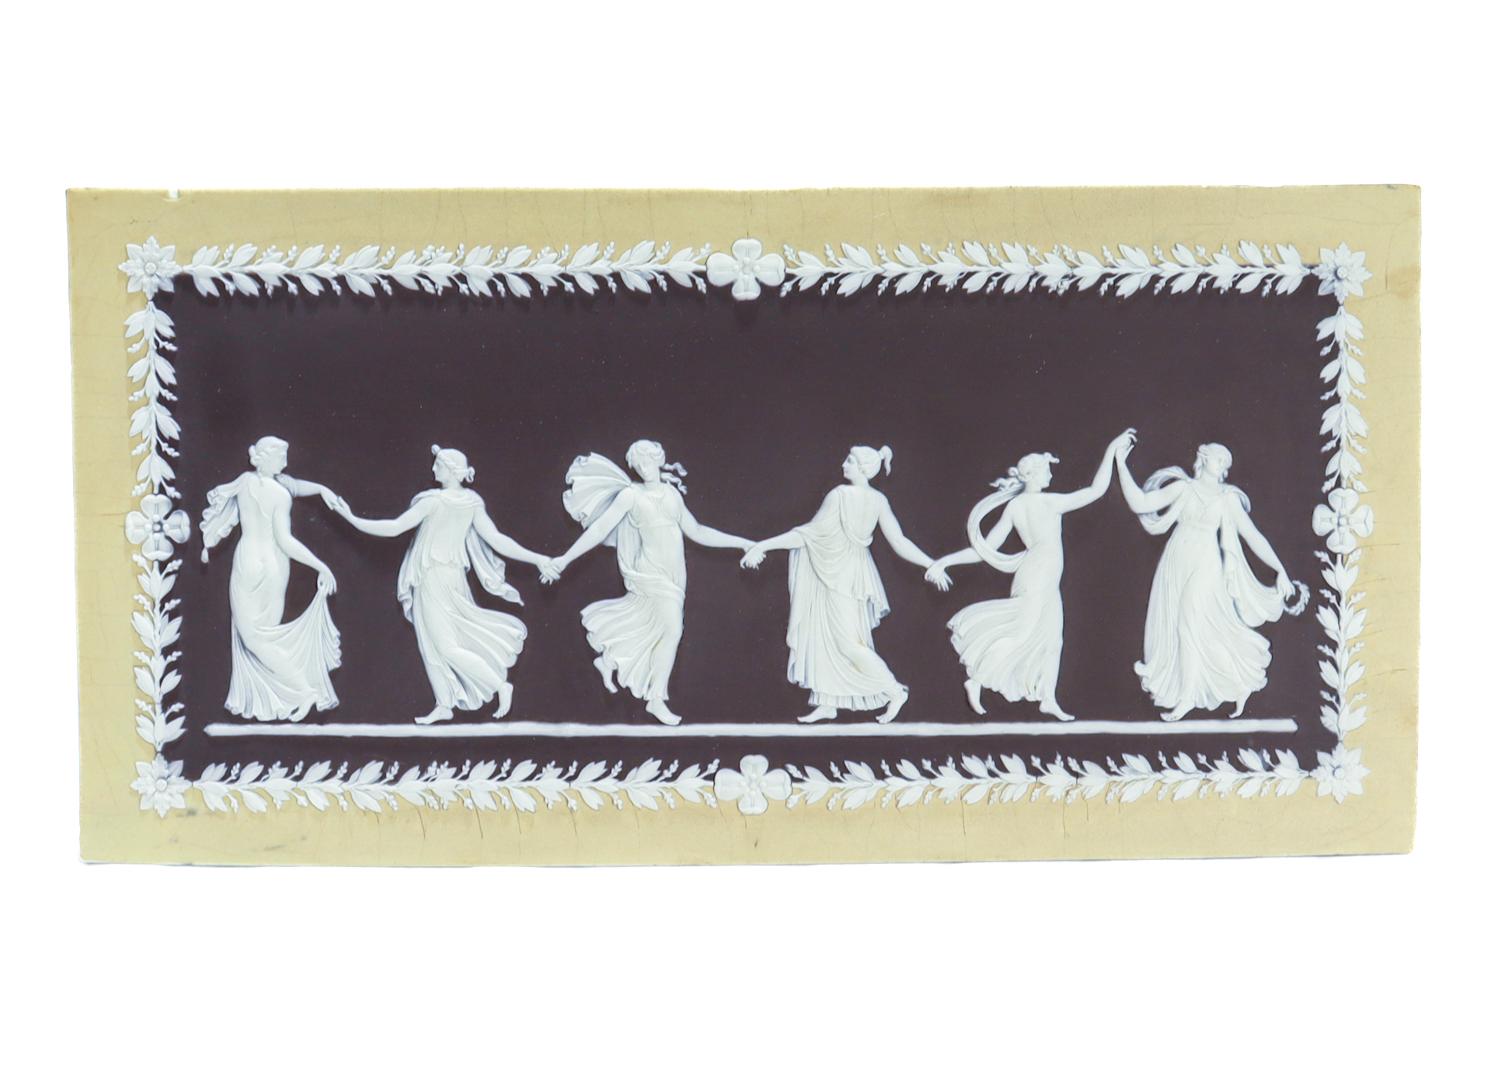 A fine antique Wedgwood jasperware plaque.

In the Dancing Hours pattern.

In three colors including a yellow border, white applied cameo decoration, and a black center.

Marked to the reverse with an impressed WEDGWOOD (only) mark.

Dating to the